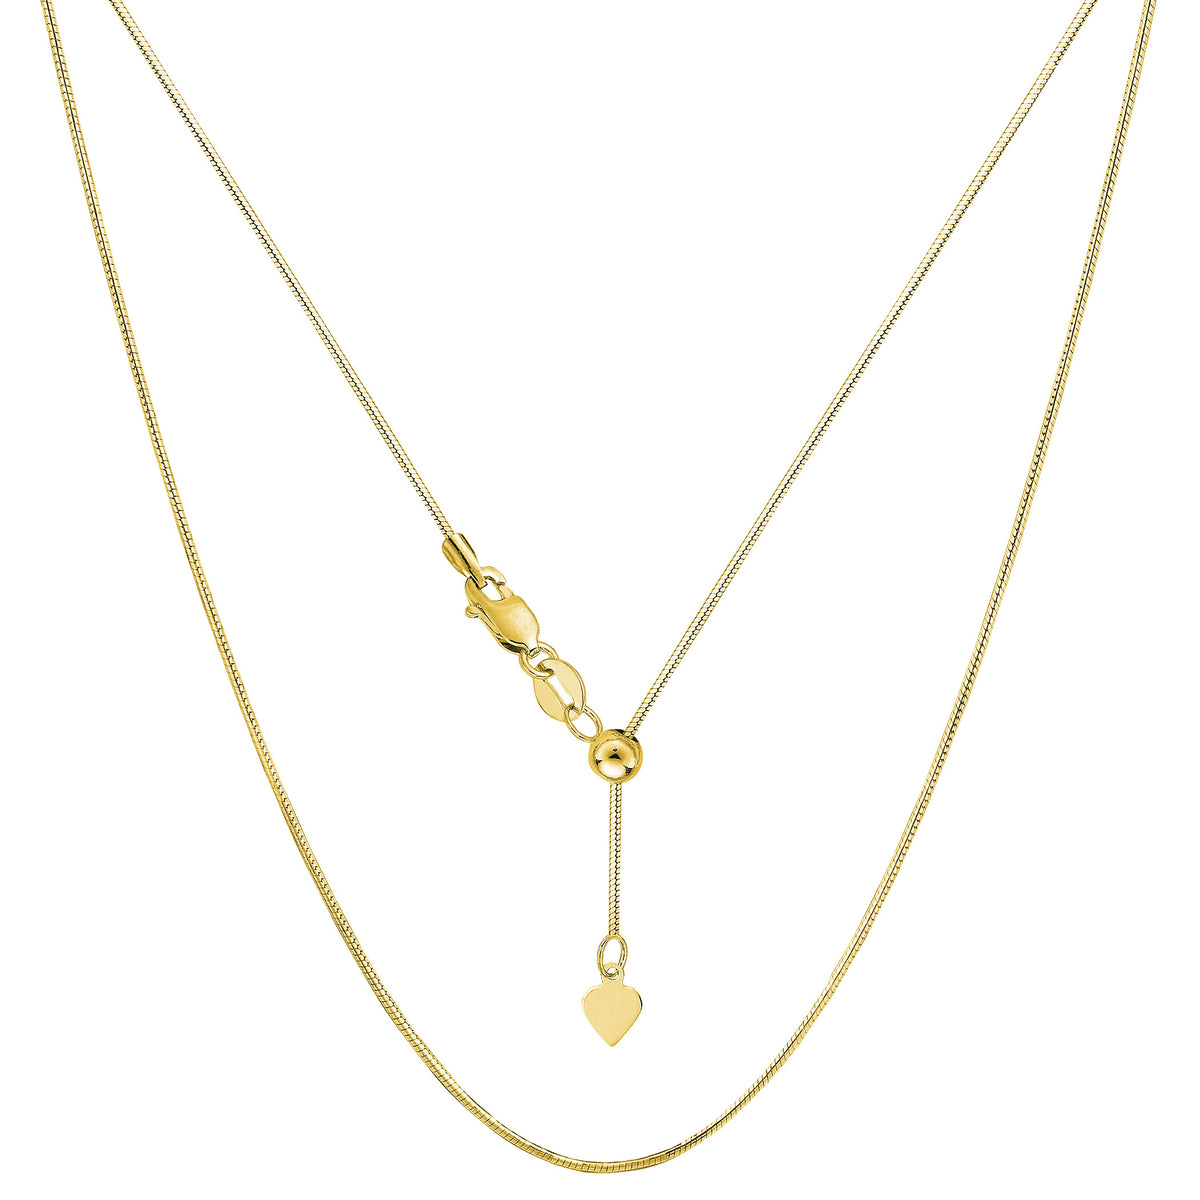 14k Yellow Gold Adjustable Octagonal Snake Chain Necklace, 0.85mm, 22" fine designer jewelry for men and women